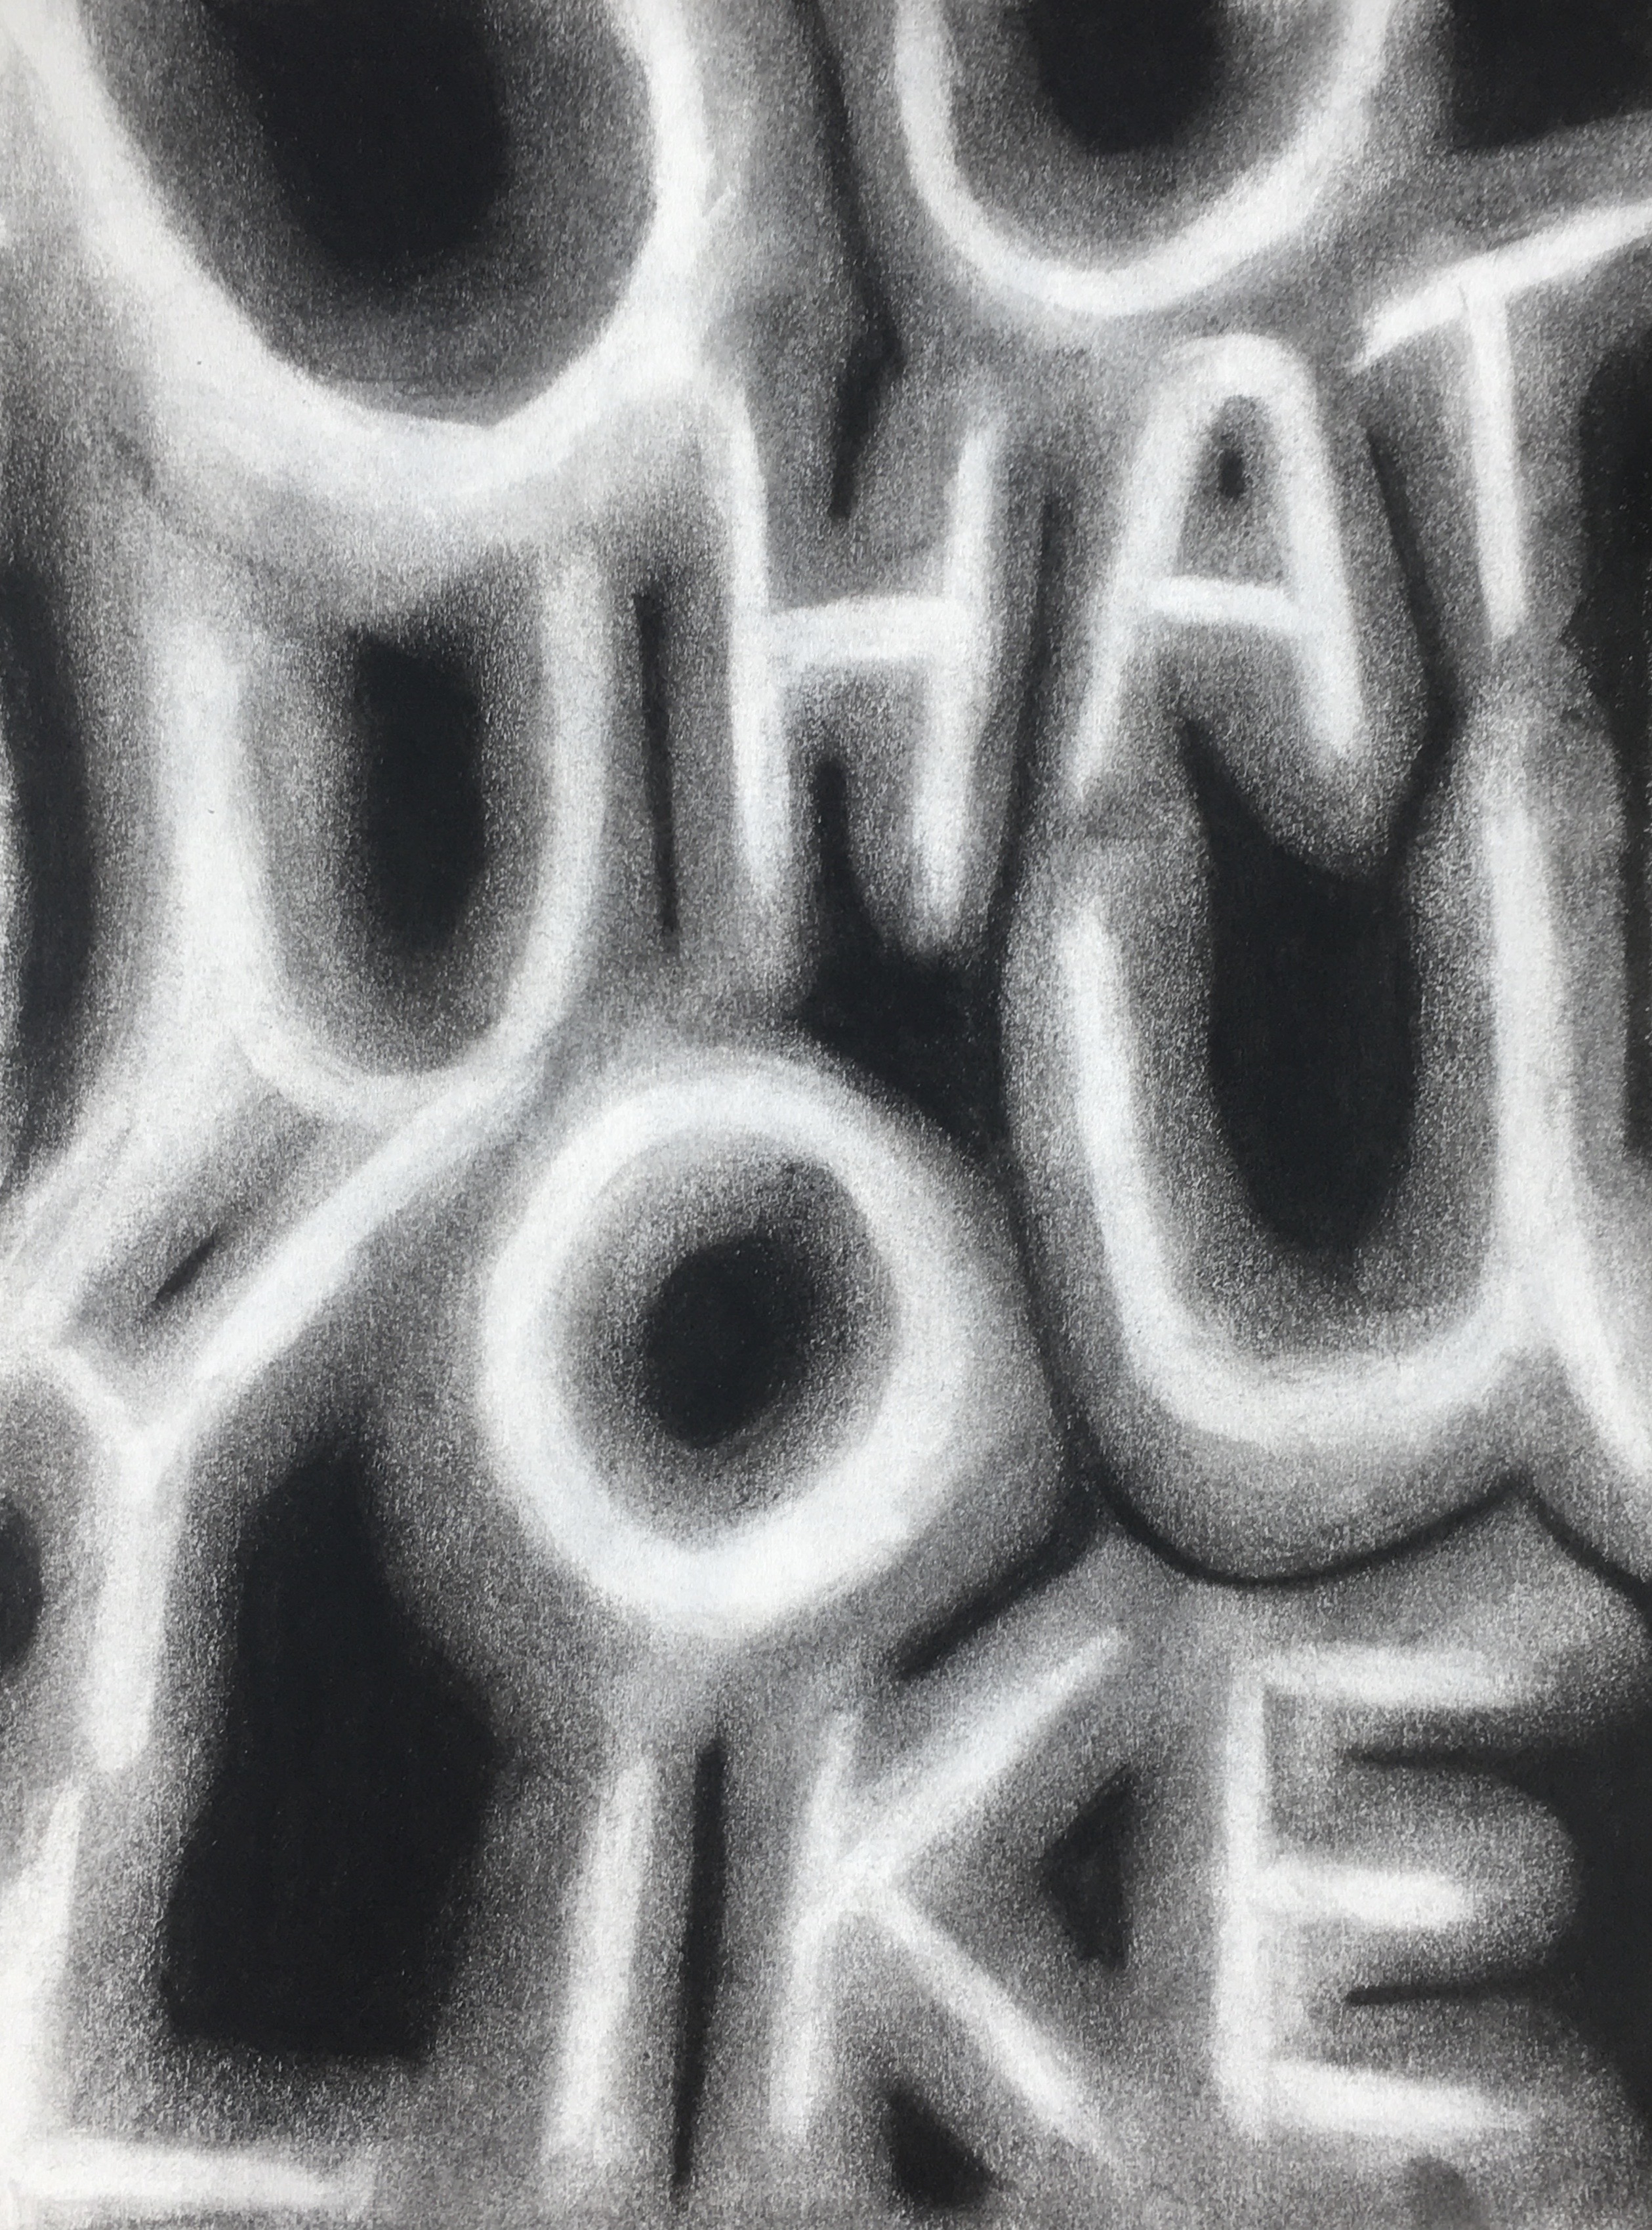 Do What You Like, 1990
Charcoal on Paper, Walli White, artist